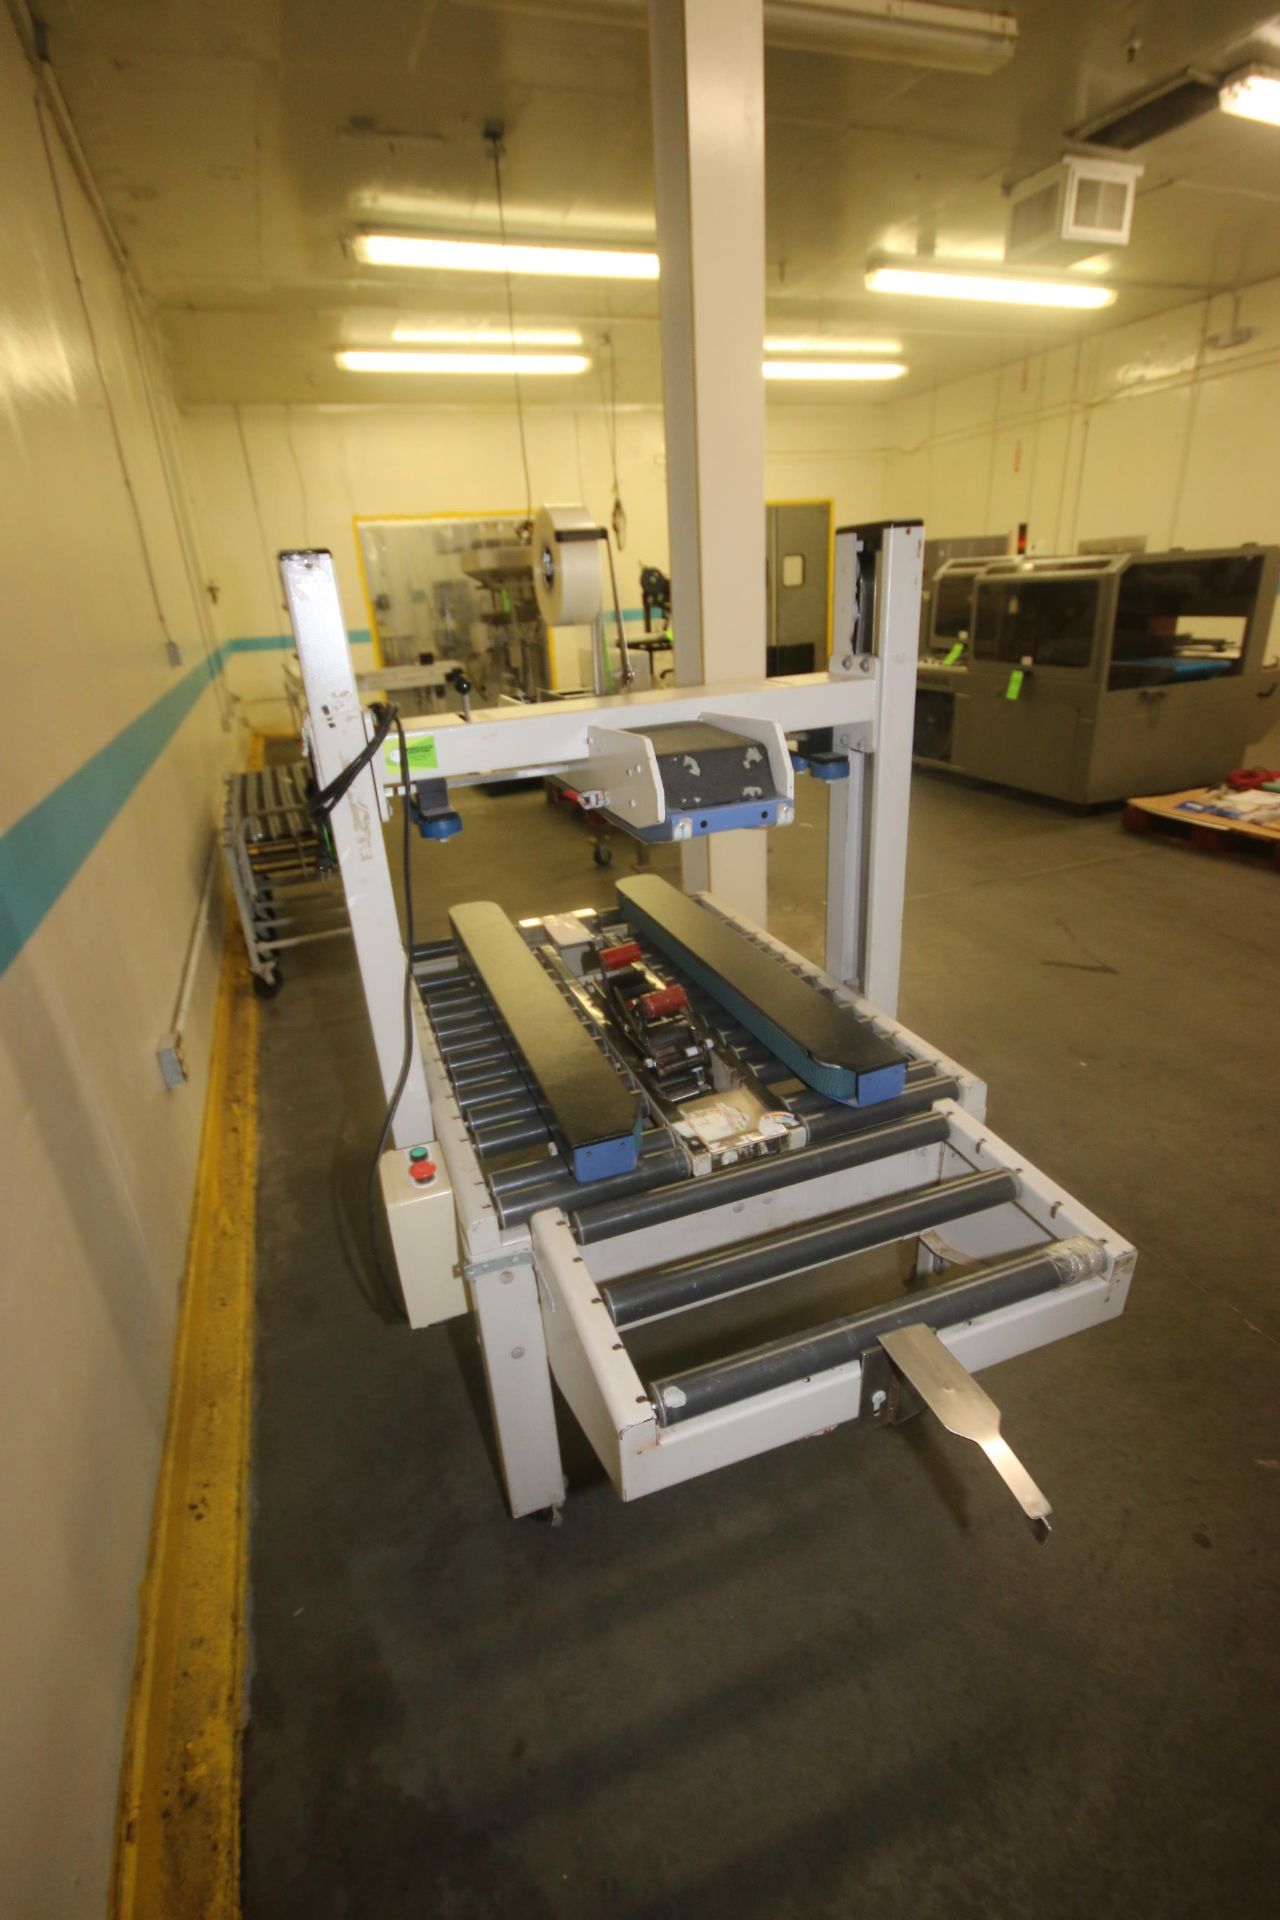 Interpack Top & Bottom Case Sealer, M/N USA 2024-SB/3, S/N C04 T544 003, 115 Volts, 1 Phase, Mounted - Image 5 of 6